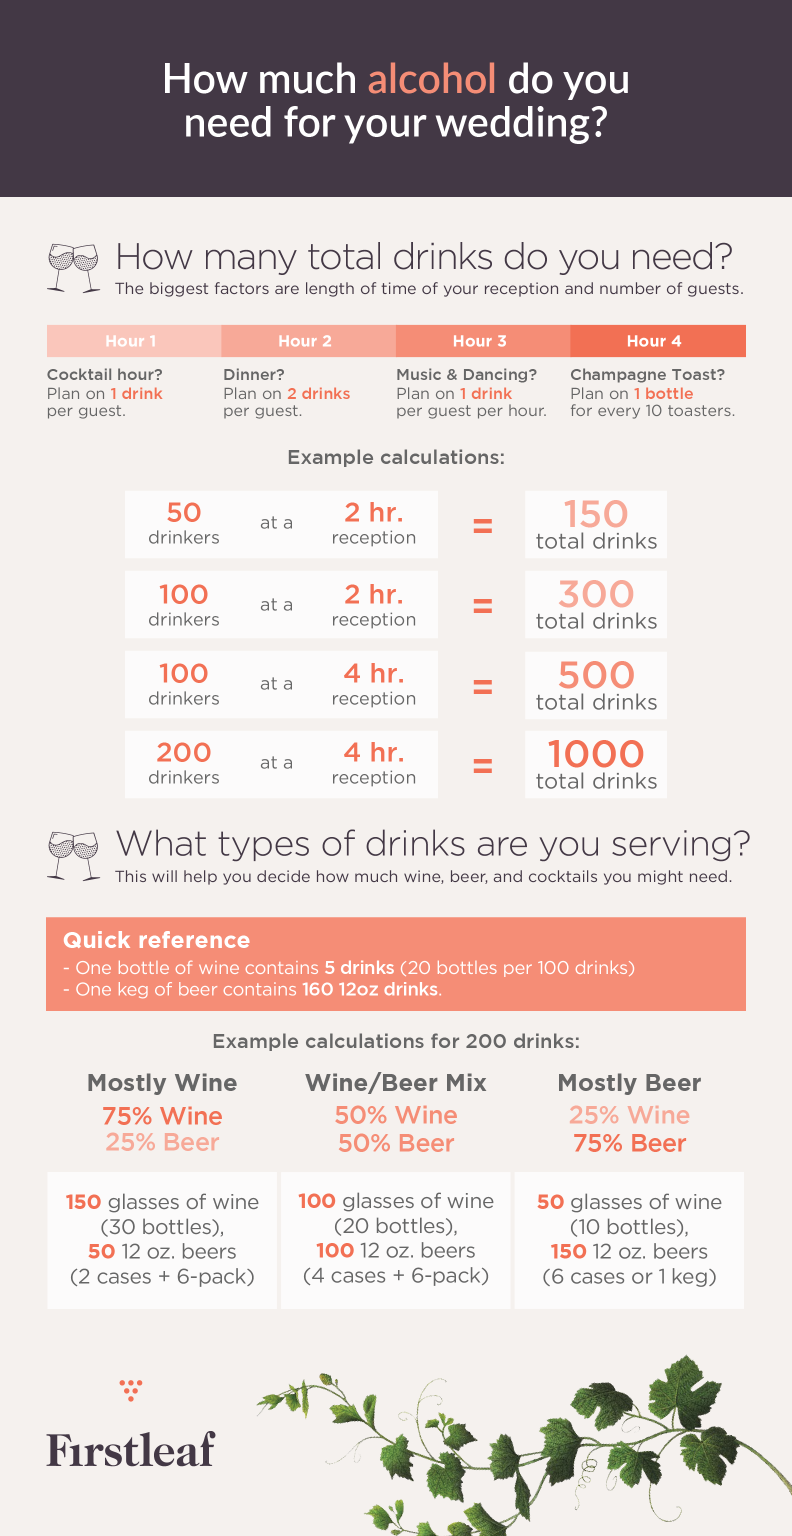 How much alcohol do you need for a wedding?